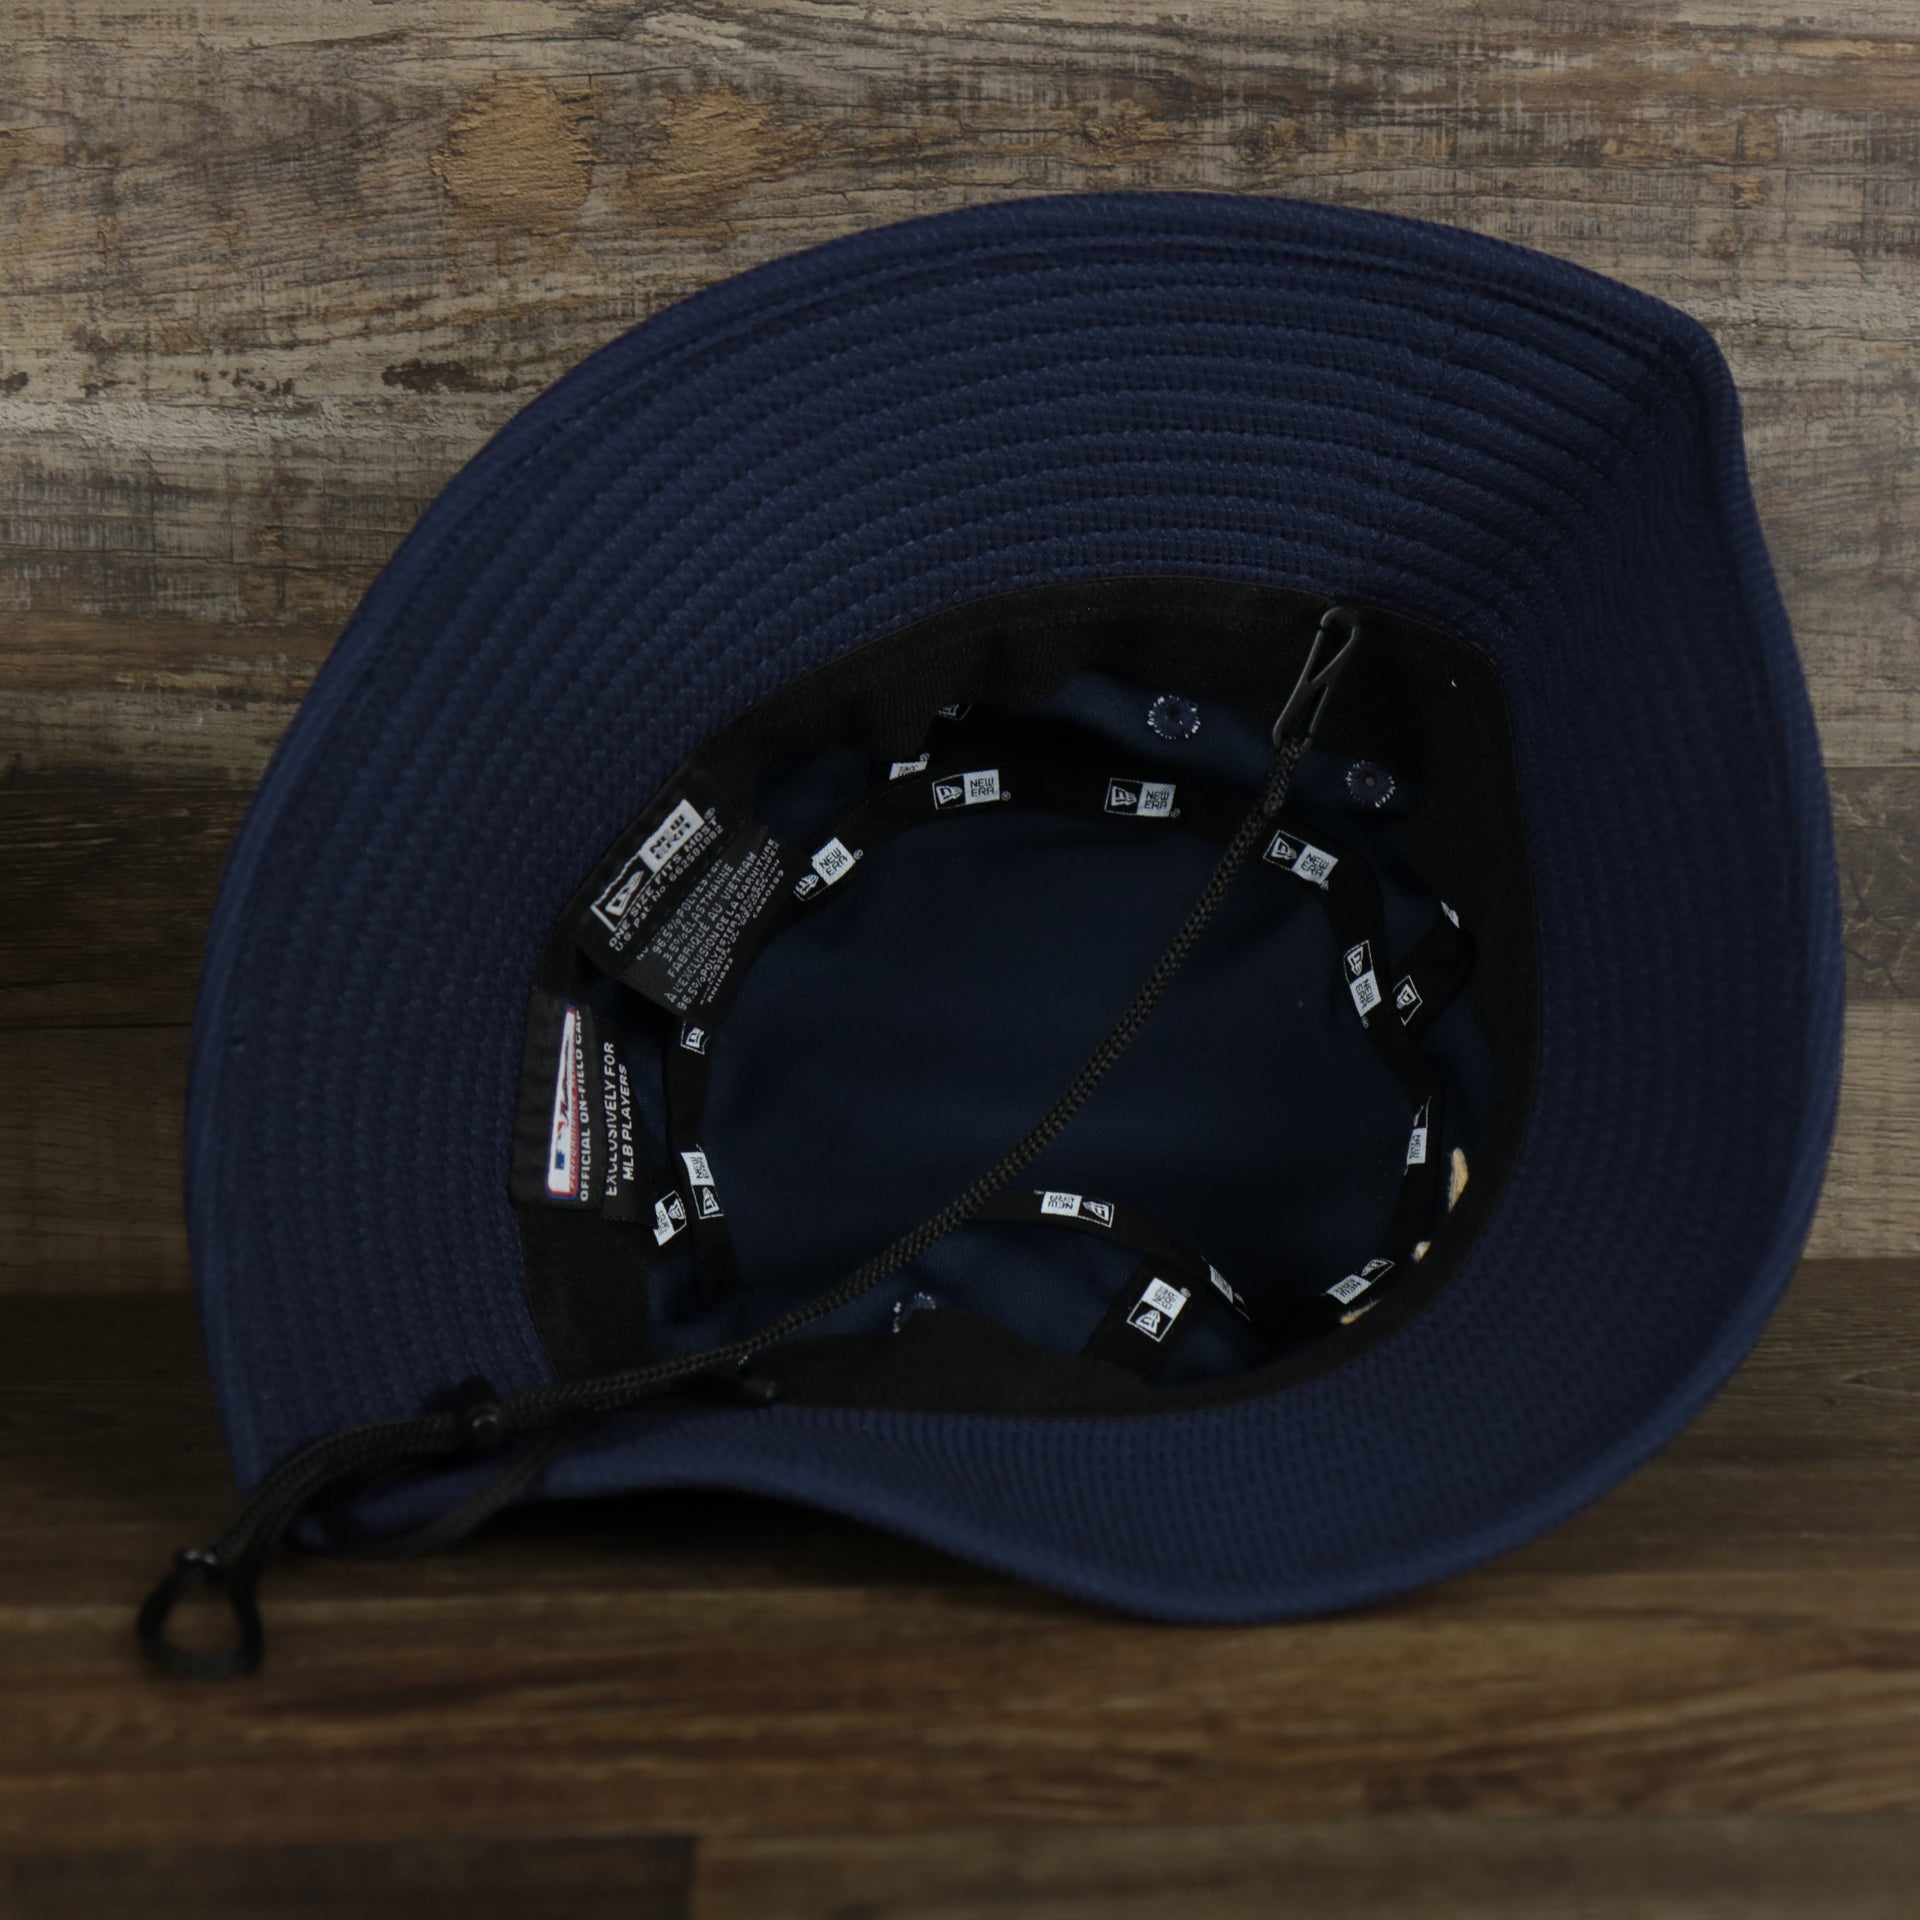 The underside of the Tampa Bay Rays MLB 2022 Spring Training Onfield Bucket Hat